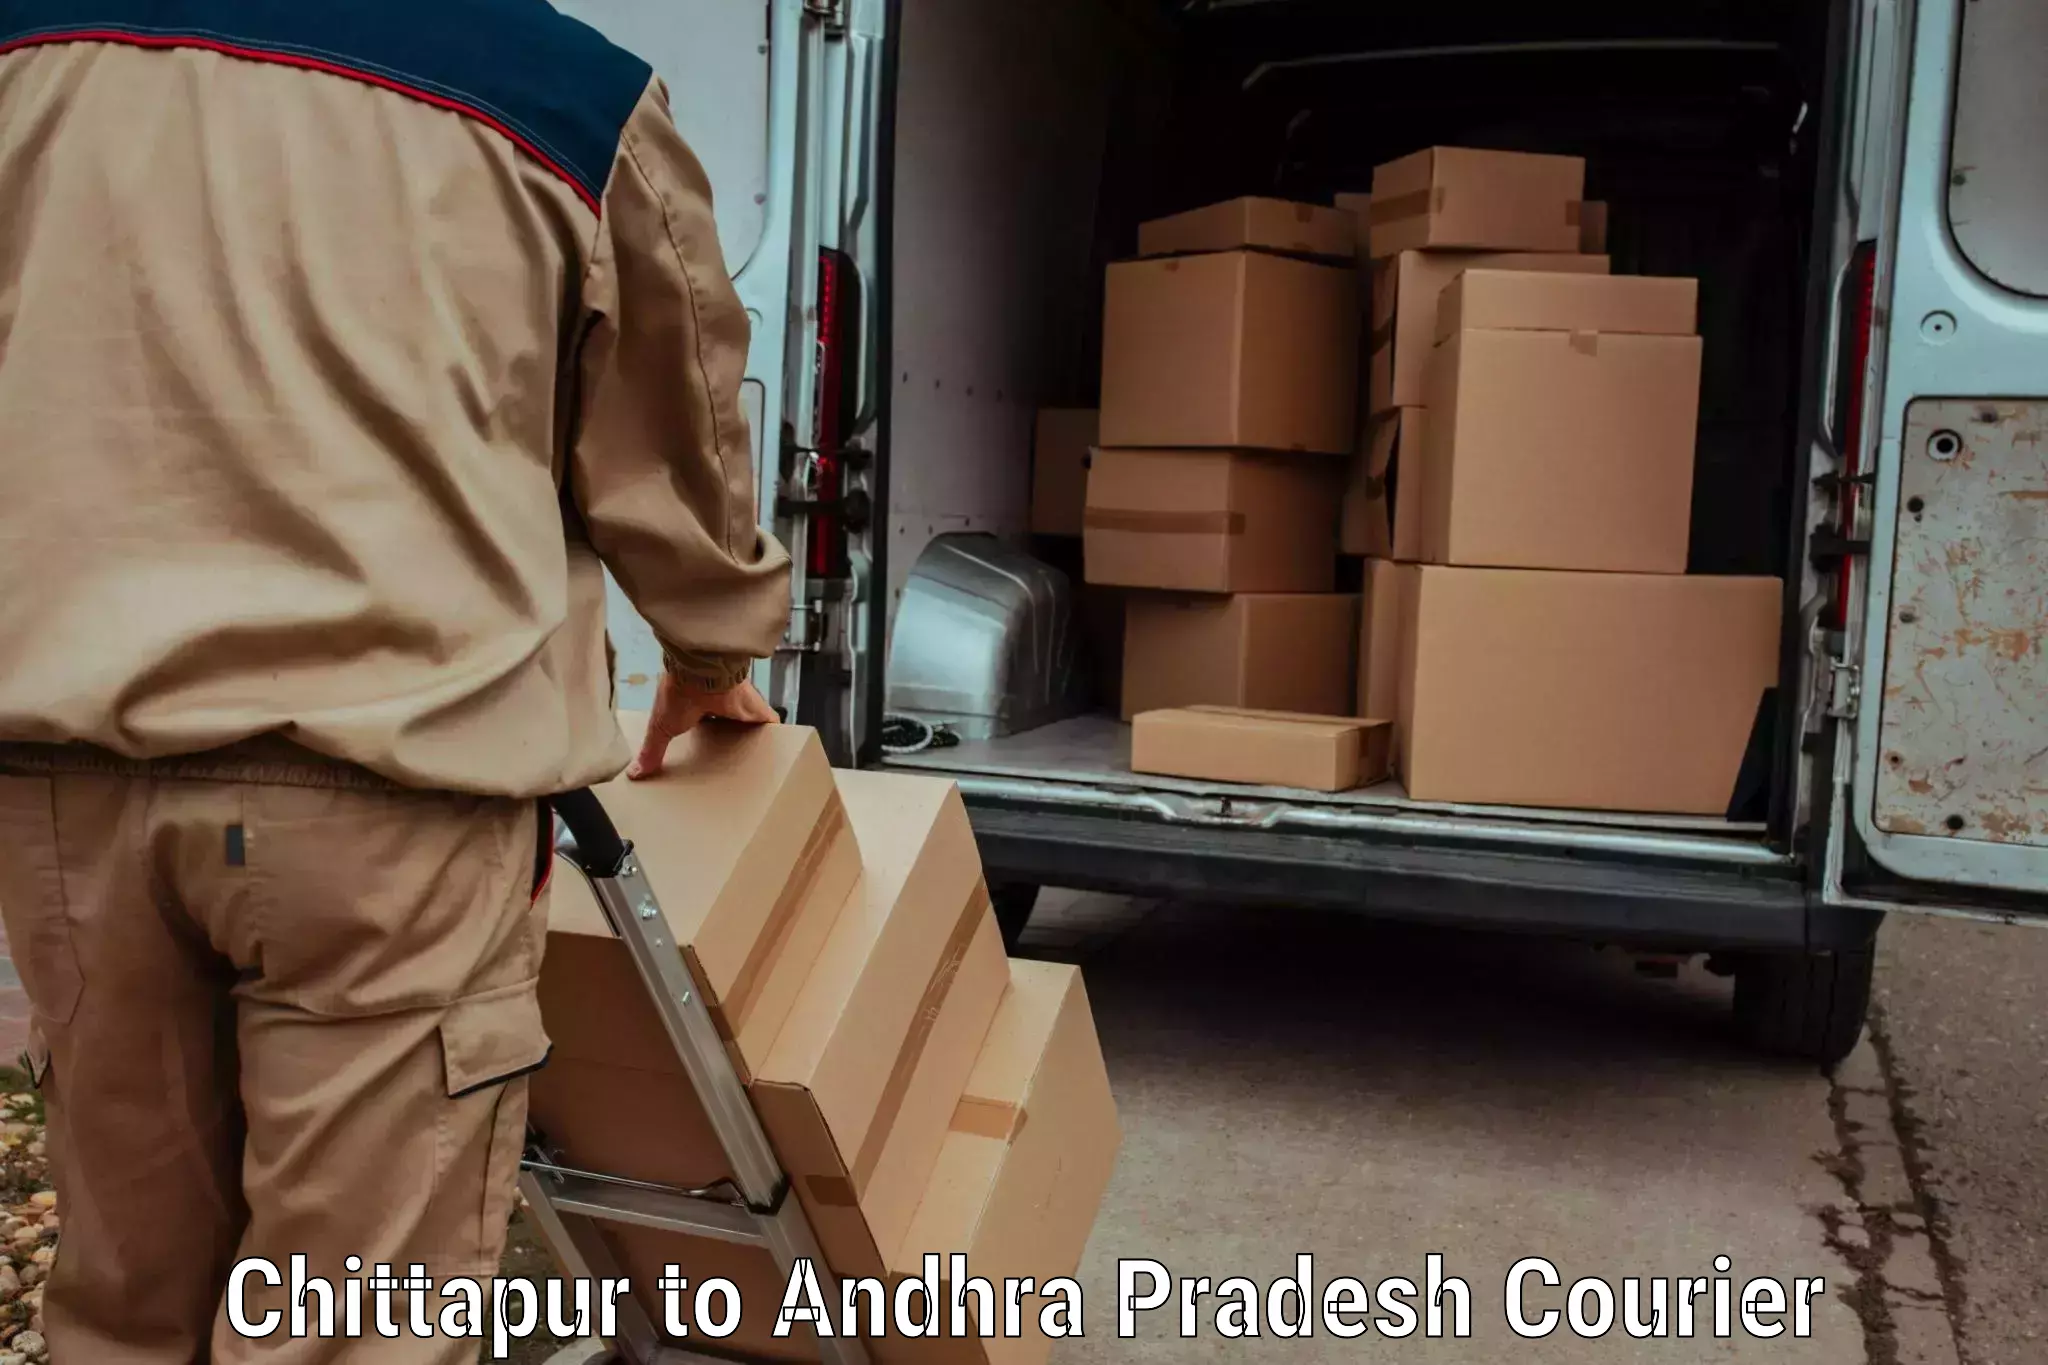 Express delivery capabilities Chittapur to Srikakulam